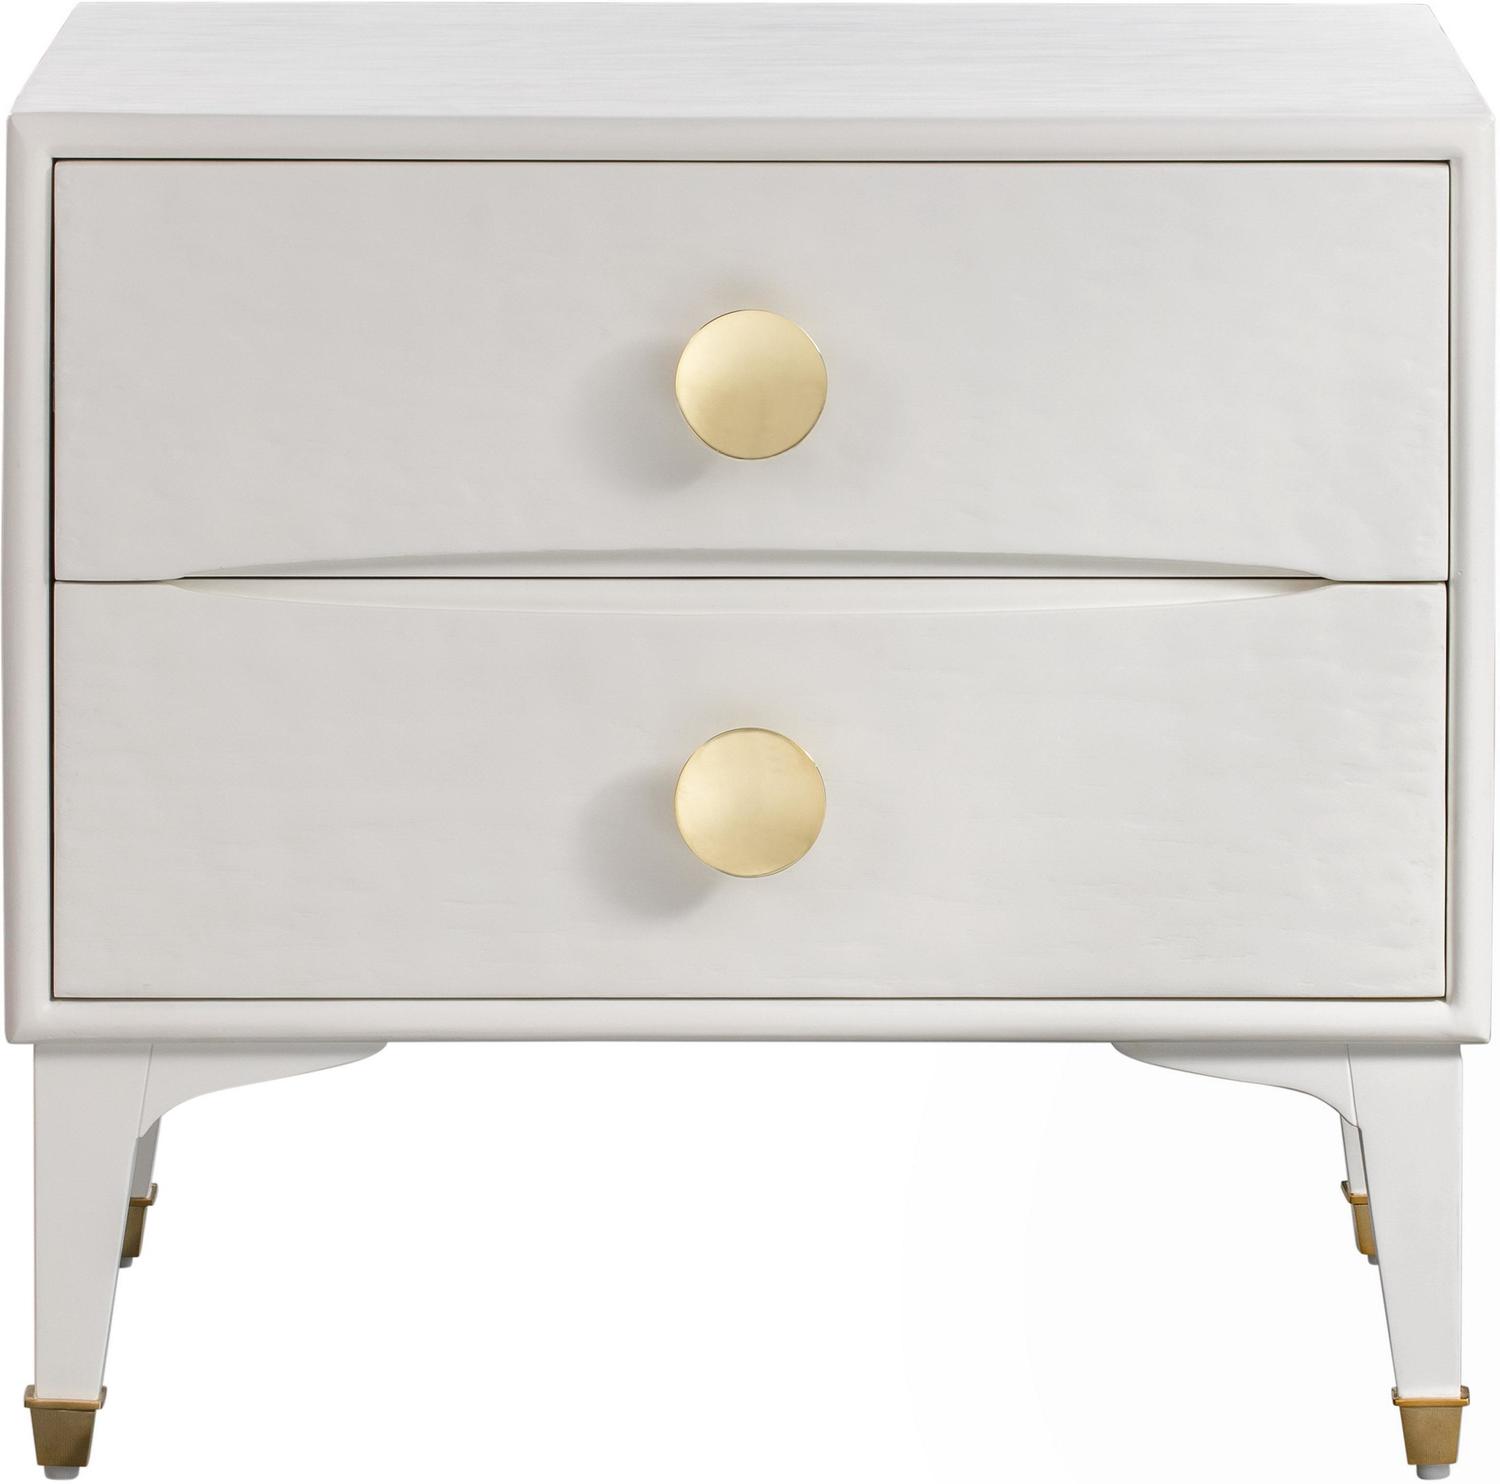  Tov Furniture Nightstands Night Stands White